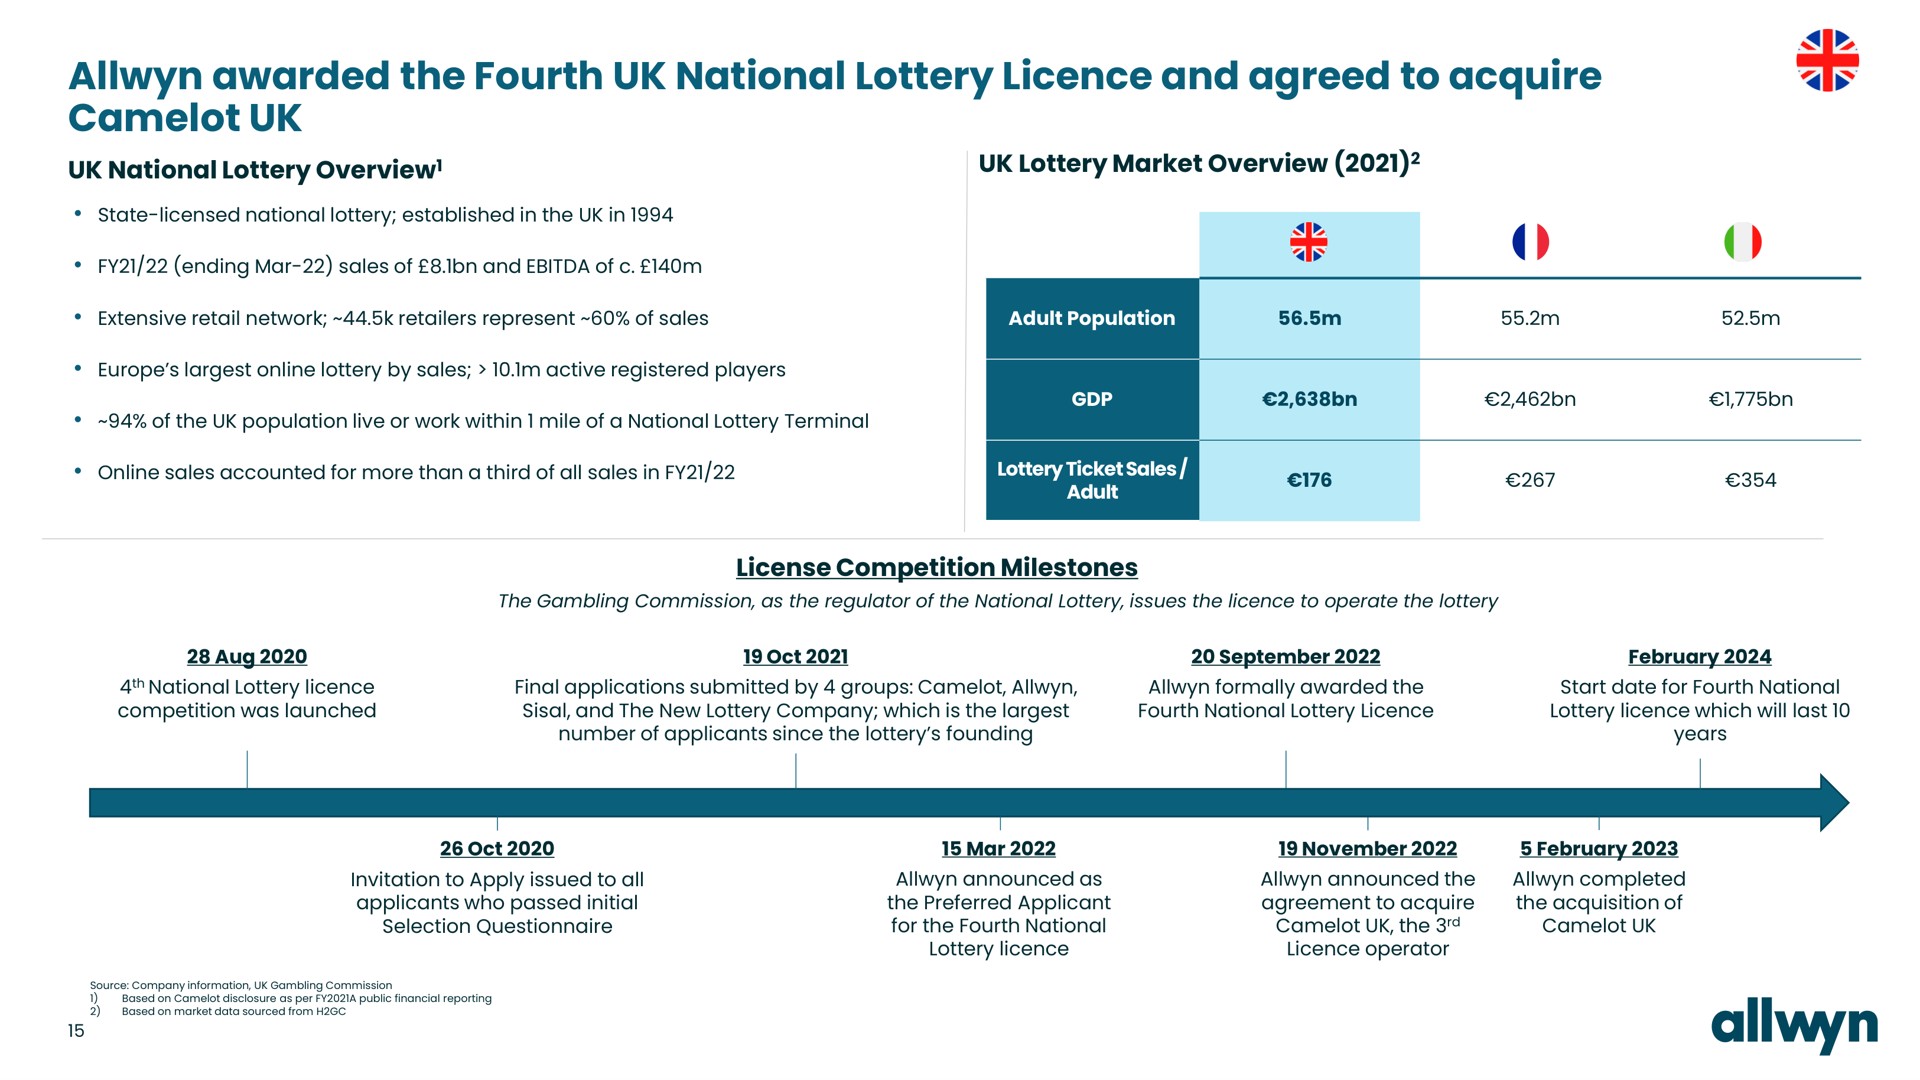 awarded the fourth national lottery and agreed to acquire i | Allwyn